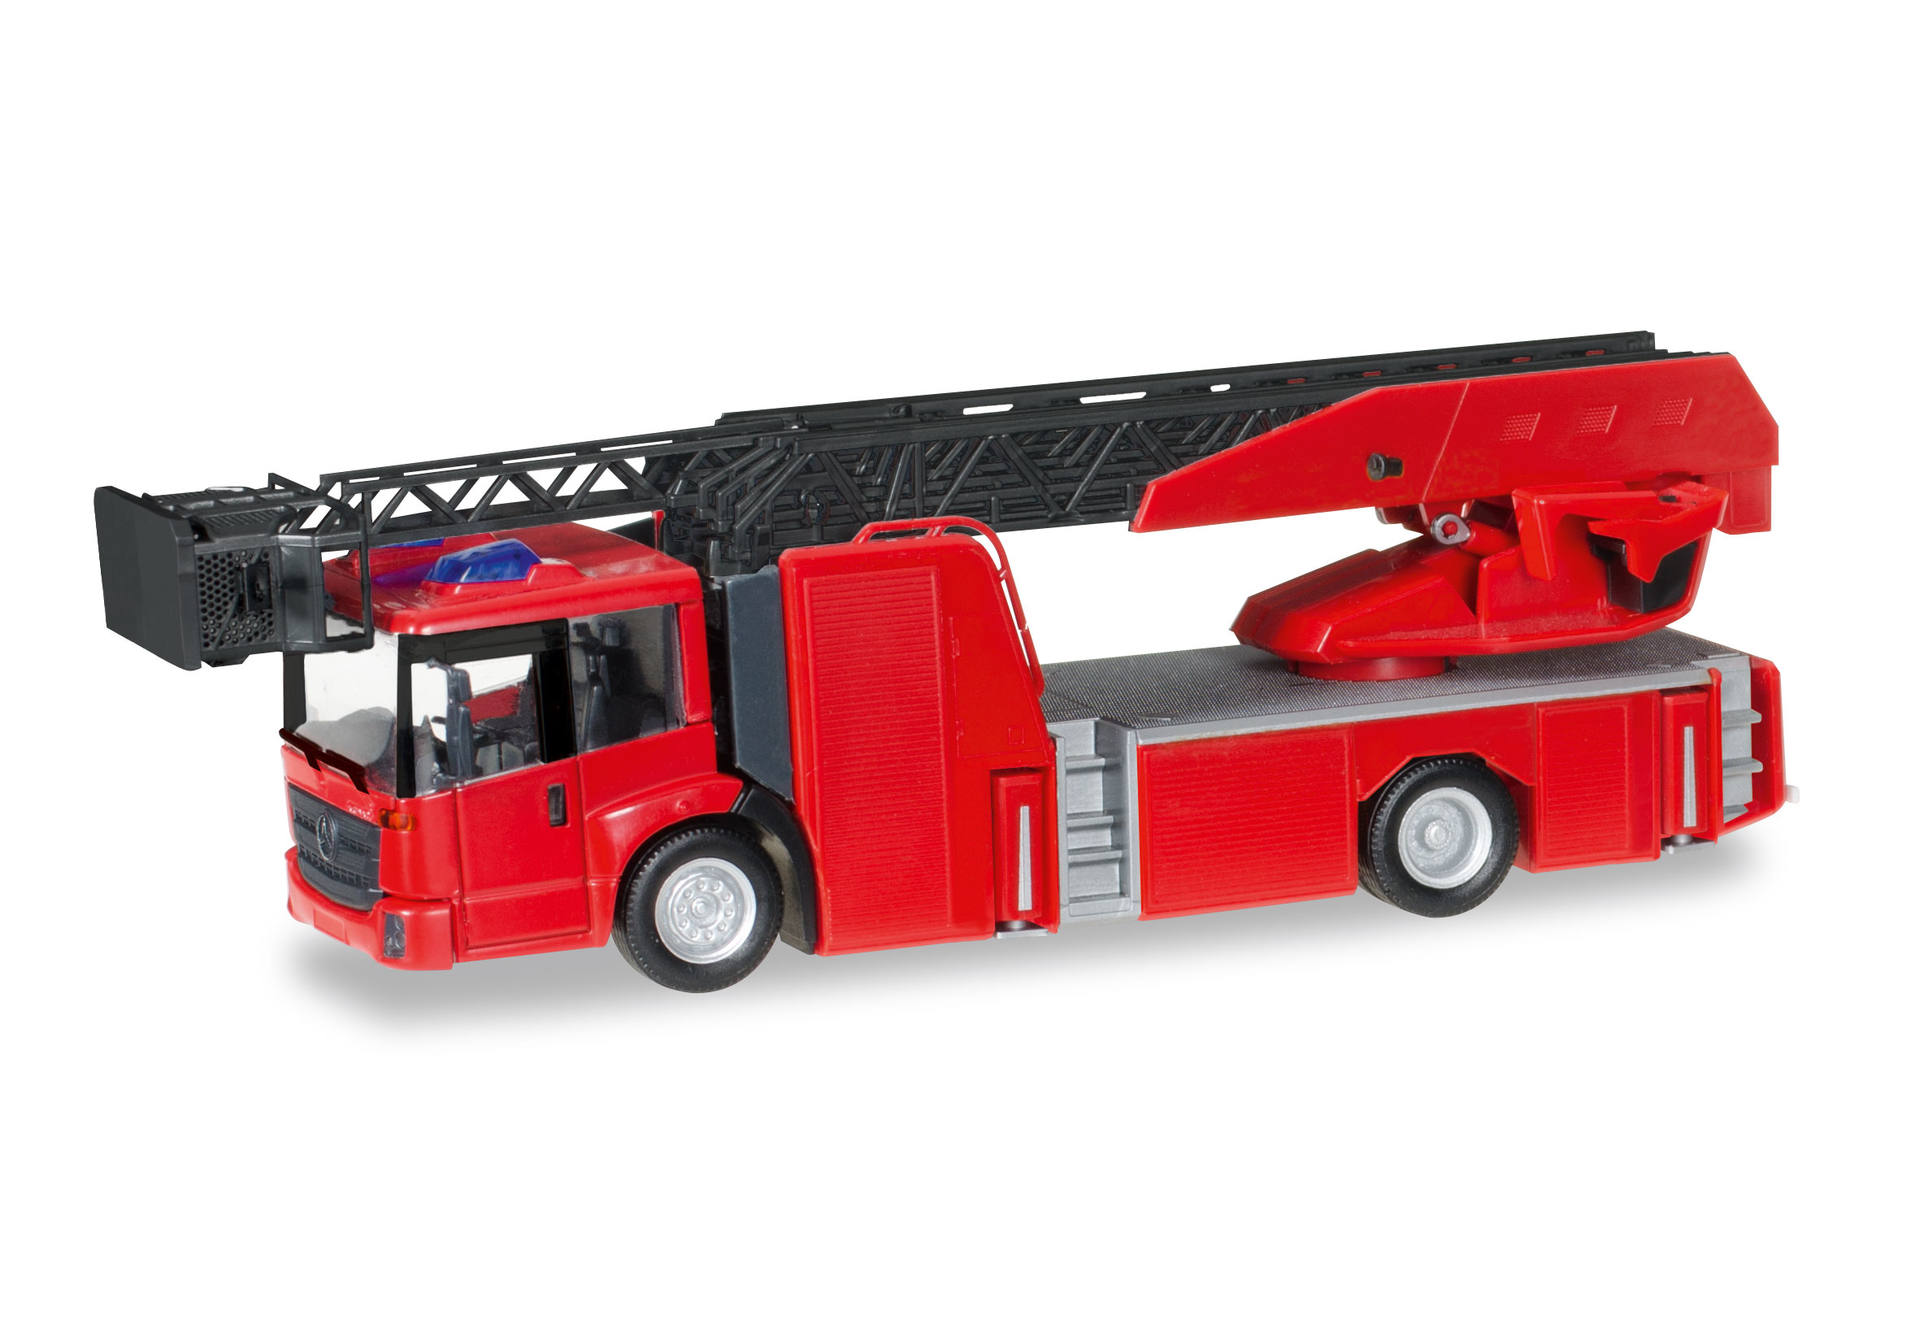 Minikit: Mercedes-Benz Econic turnable ladder truck, red